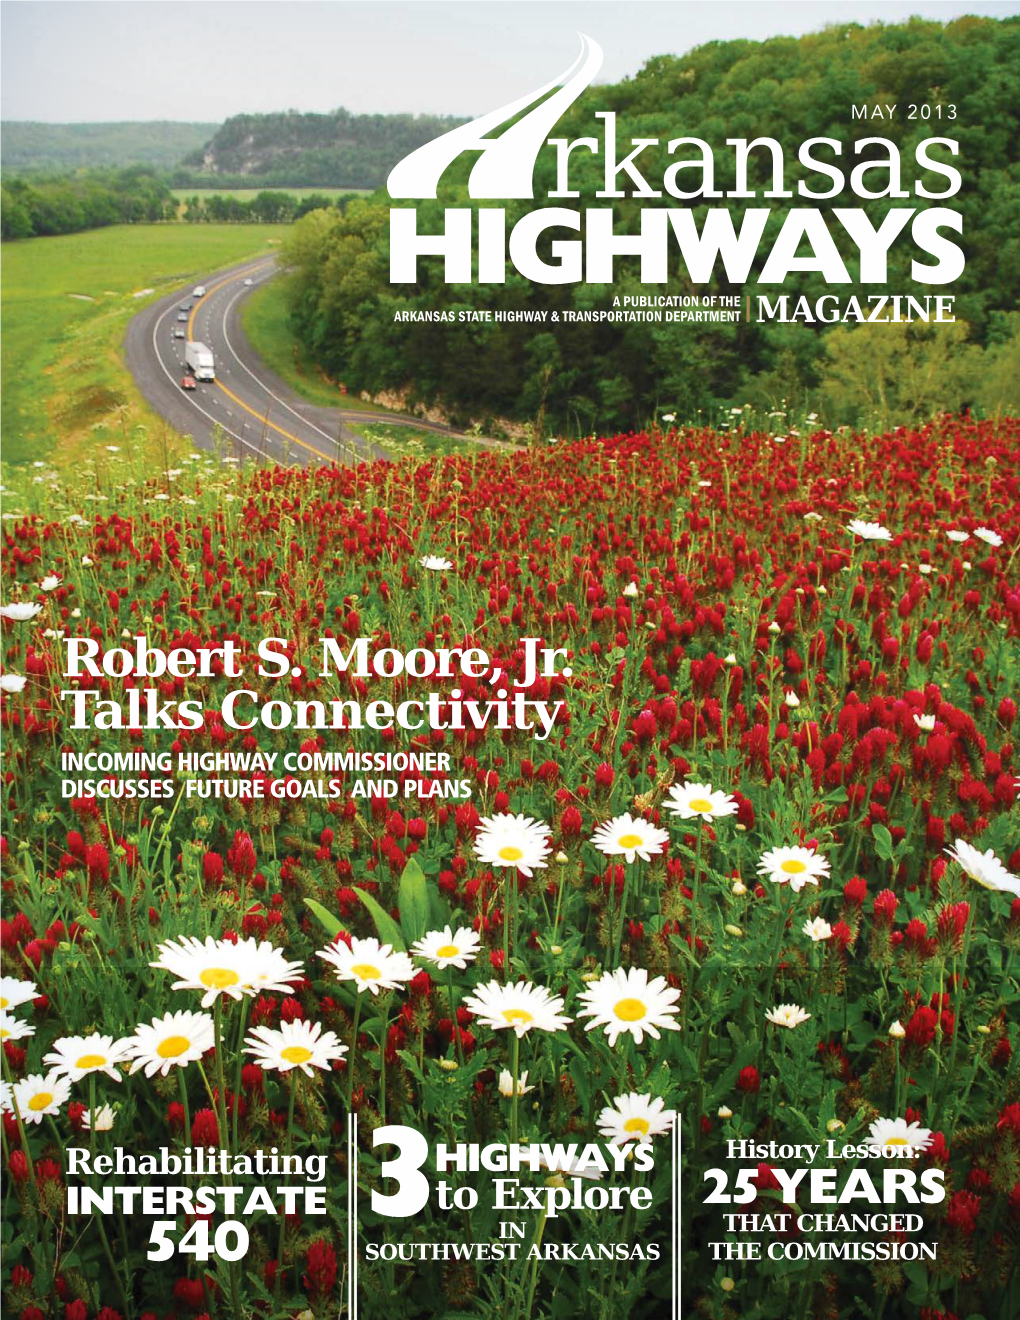 Robert S. Moore, Jr. Talks Connectivity INCOMING HIGHWAY COMMISSIONER DISCUSSES FUTURE GOALS and PLANS